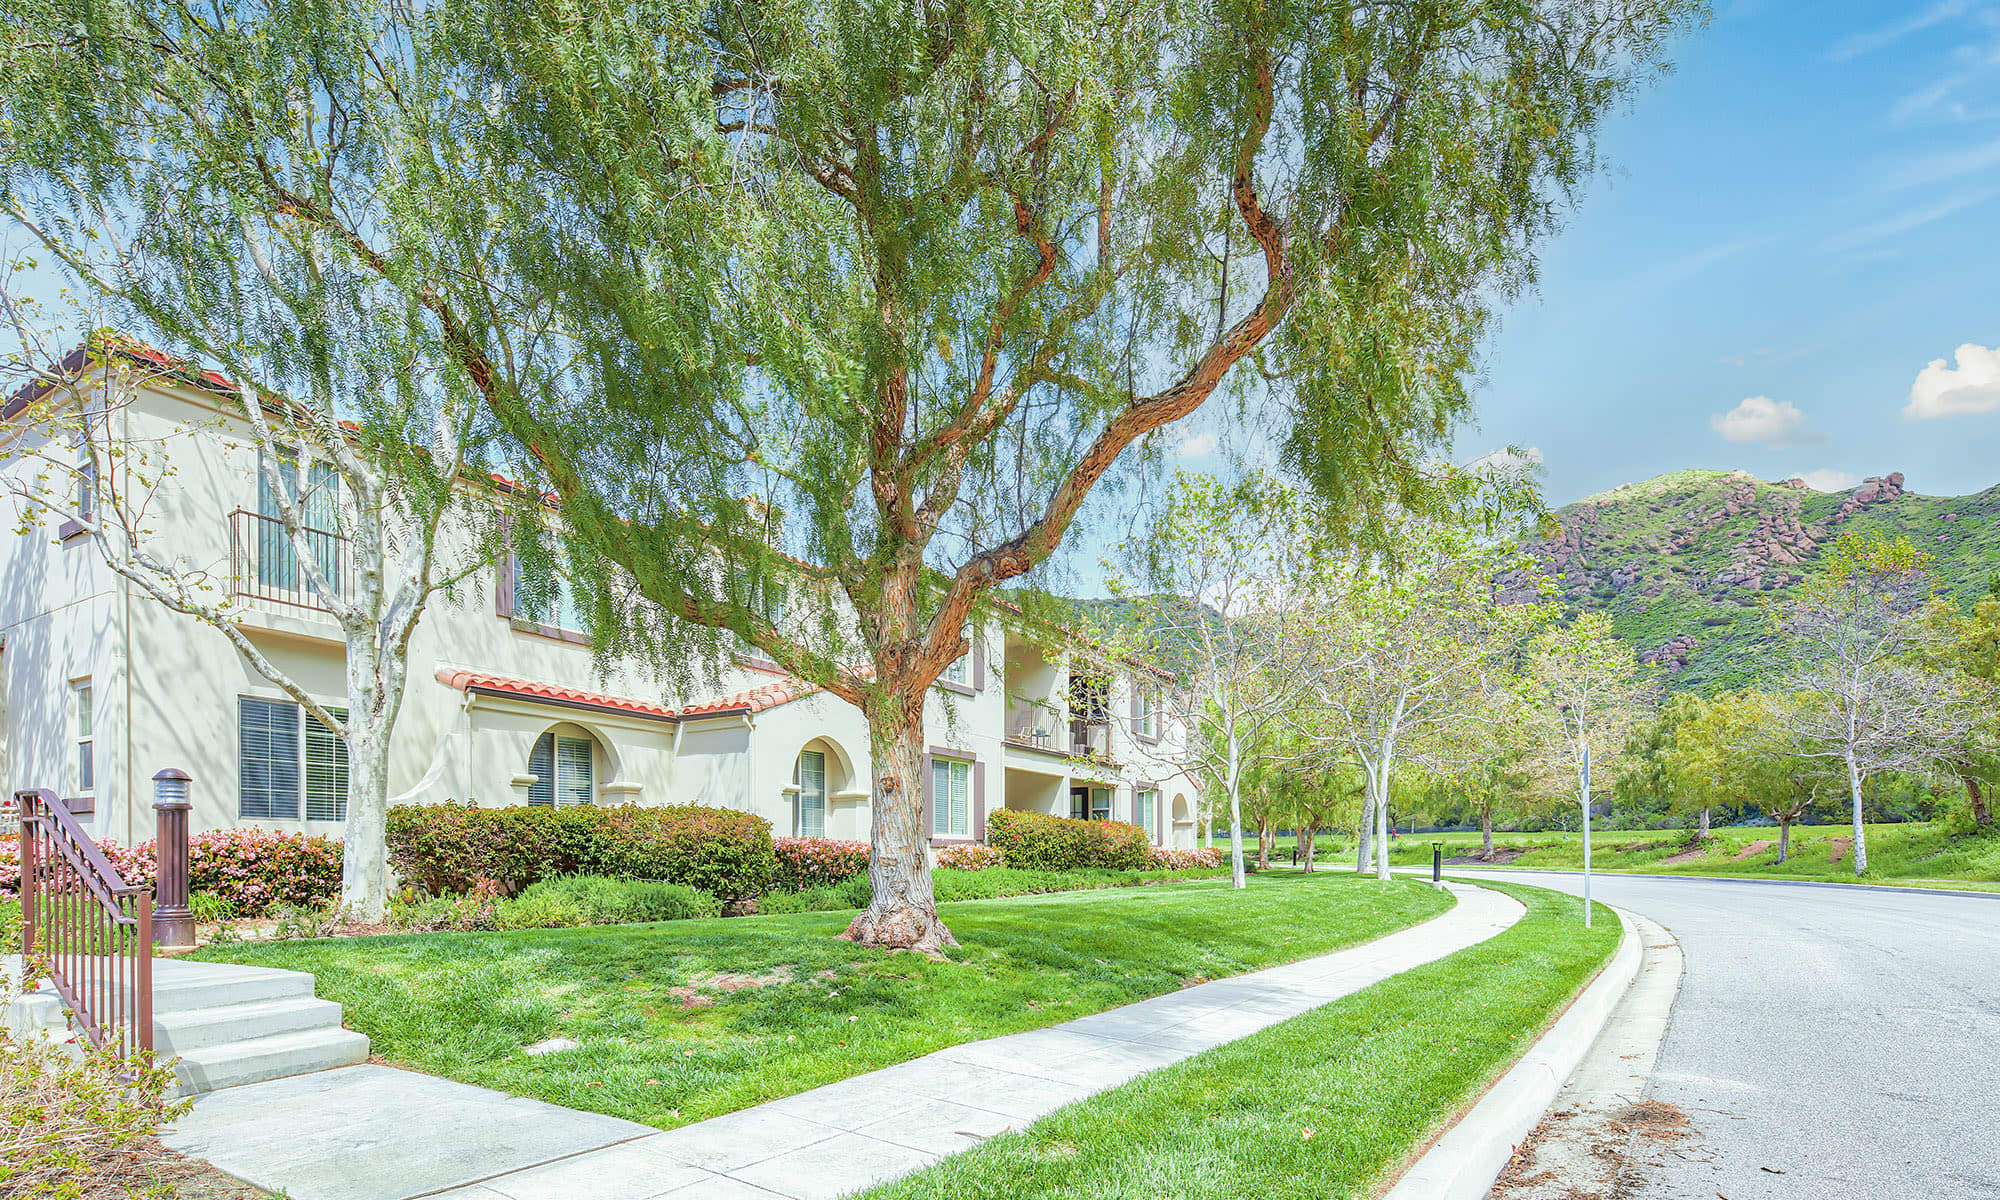 Street view of our suburban community at Mission Hills in Camarillo, California